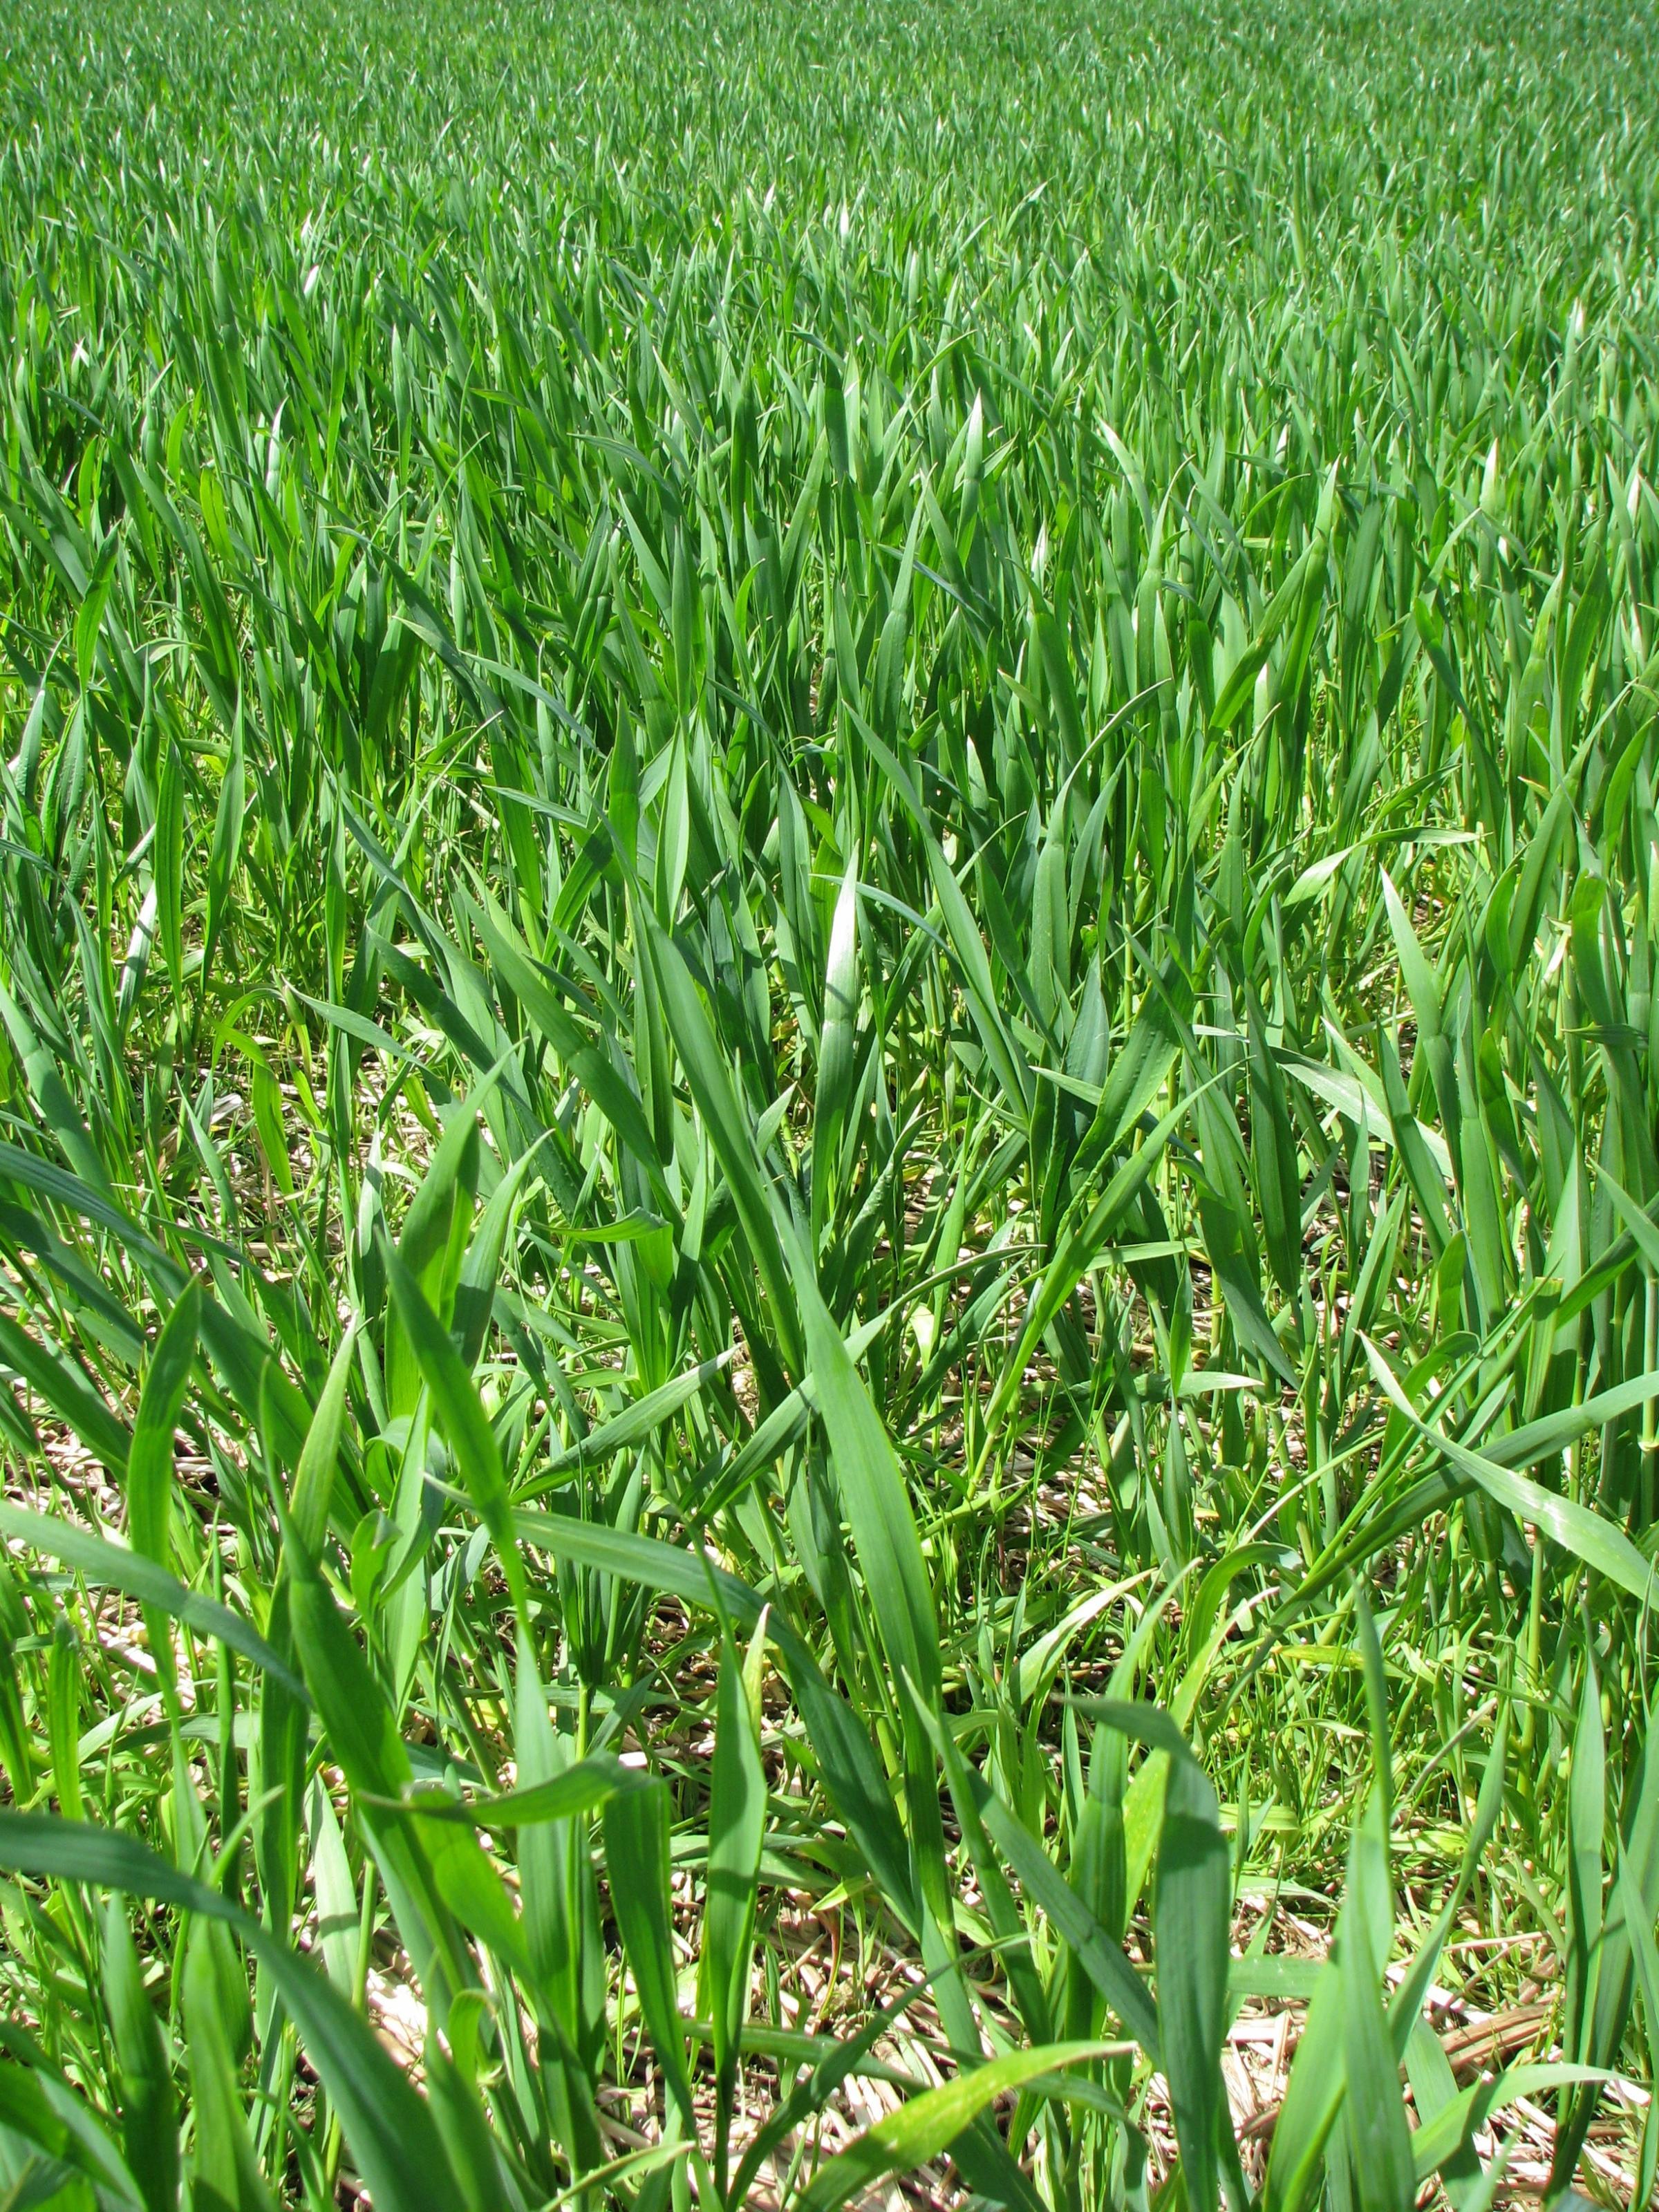 Autumn crops looking strong despite some disease threat